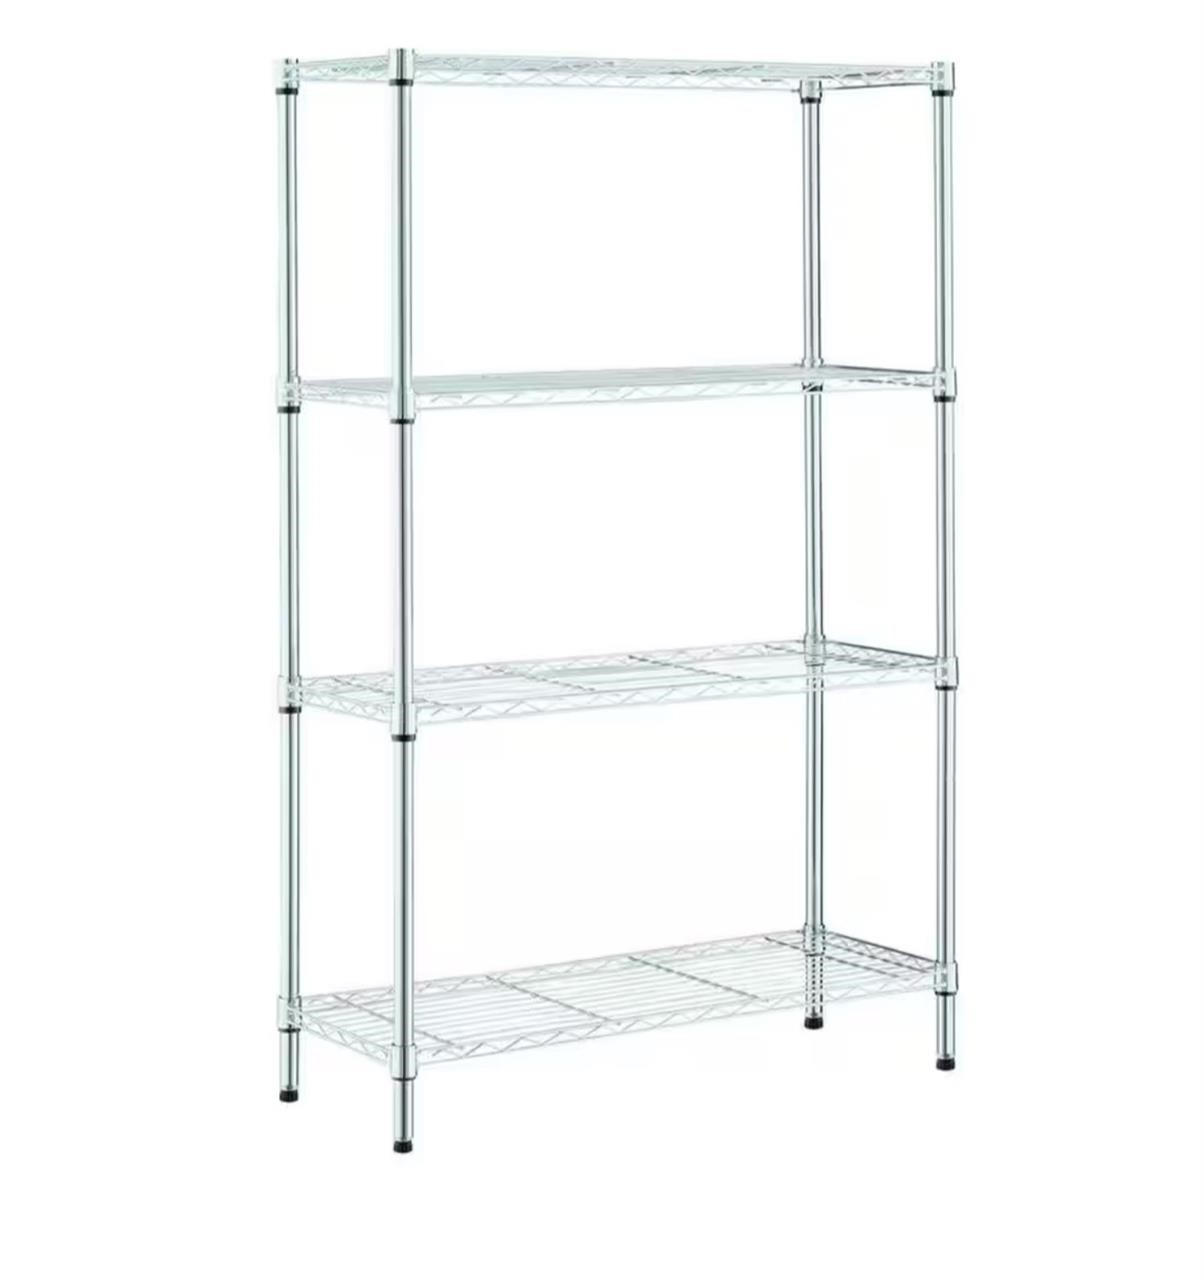 4-Tier Steel Wire Shelving Unit in Chrome